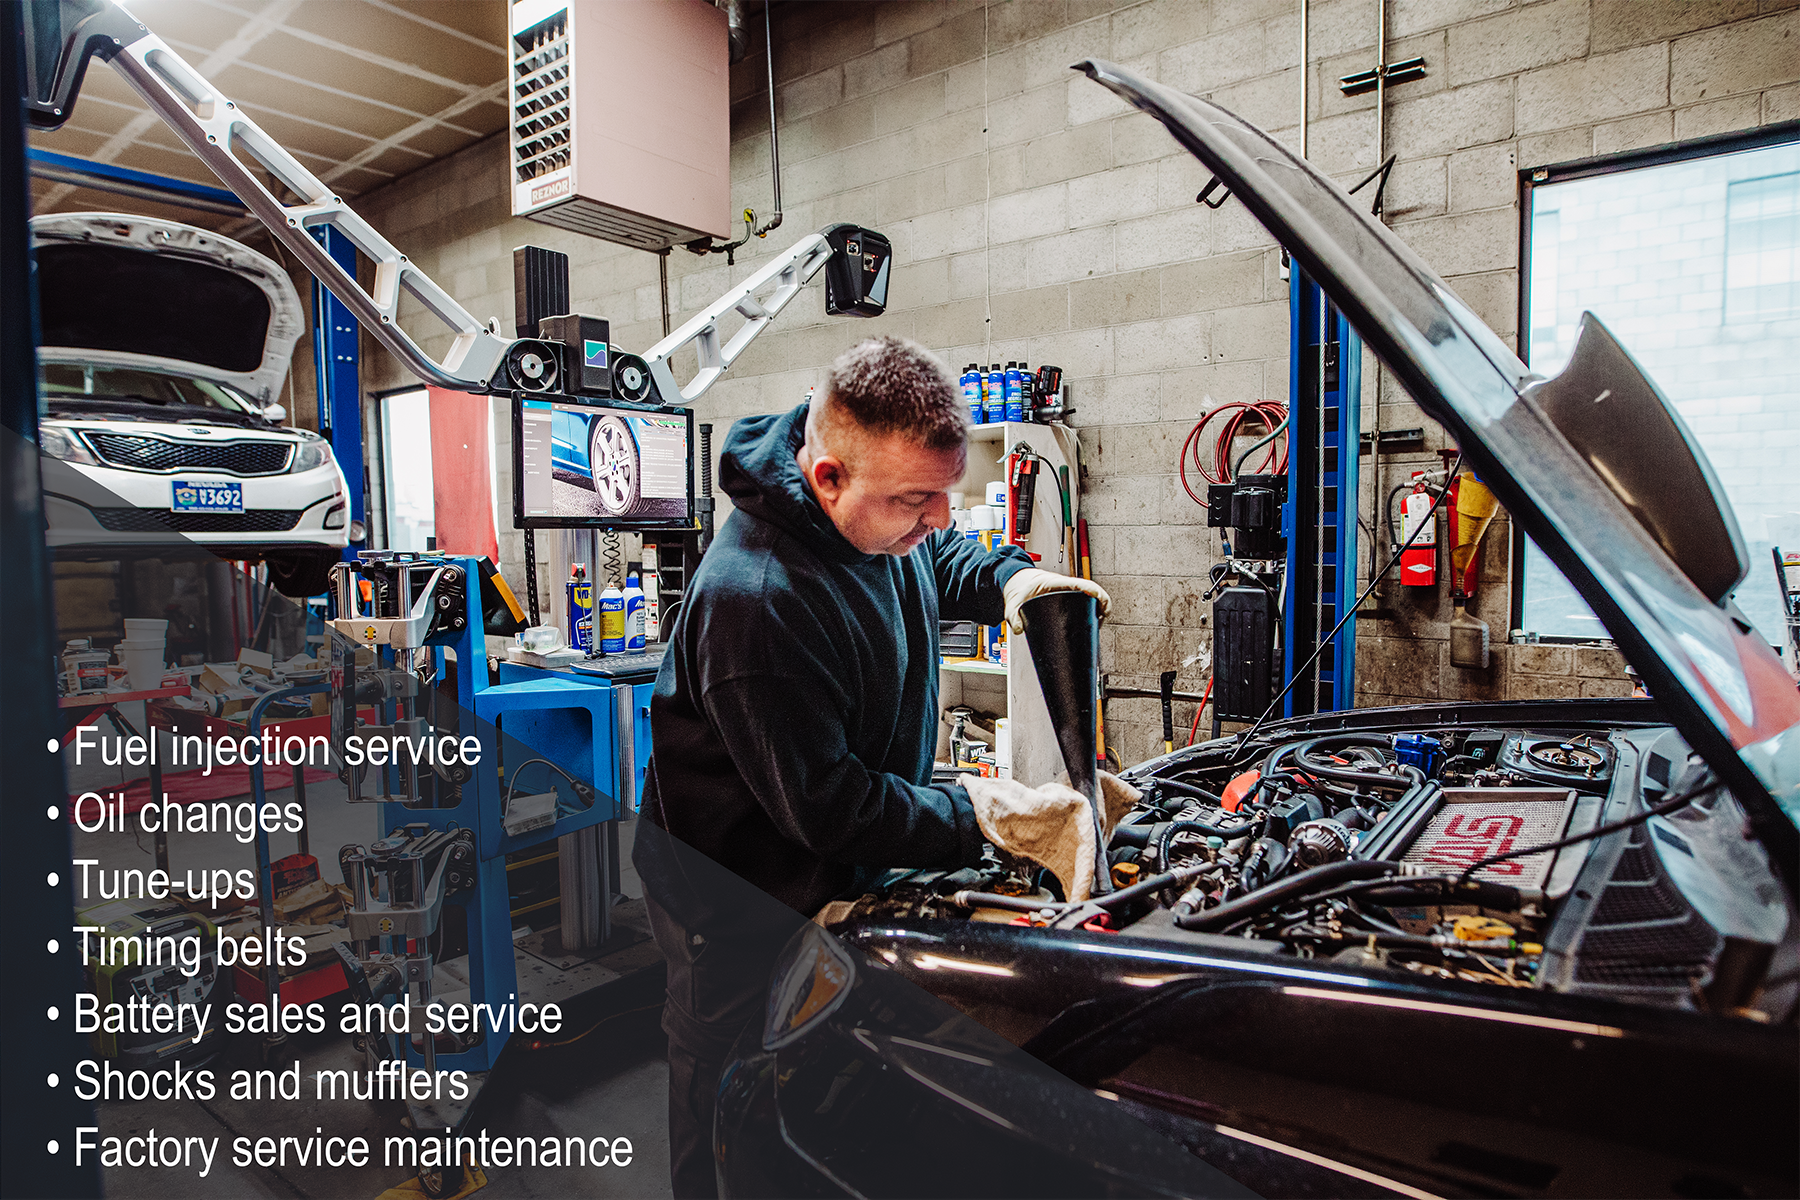 • Fuel injection service  • Oil changes  • Tune-ups  • Timing belts  • Battery sales and service  • Shocks and mufflers  • Factory service maintenance